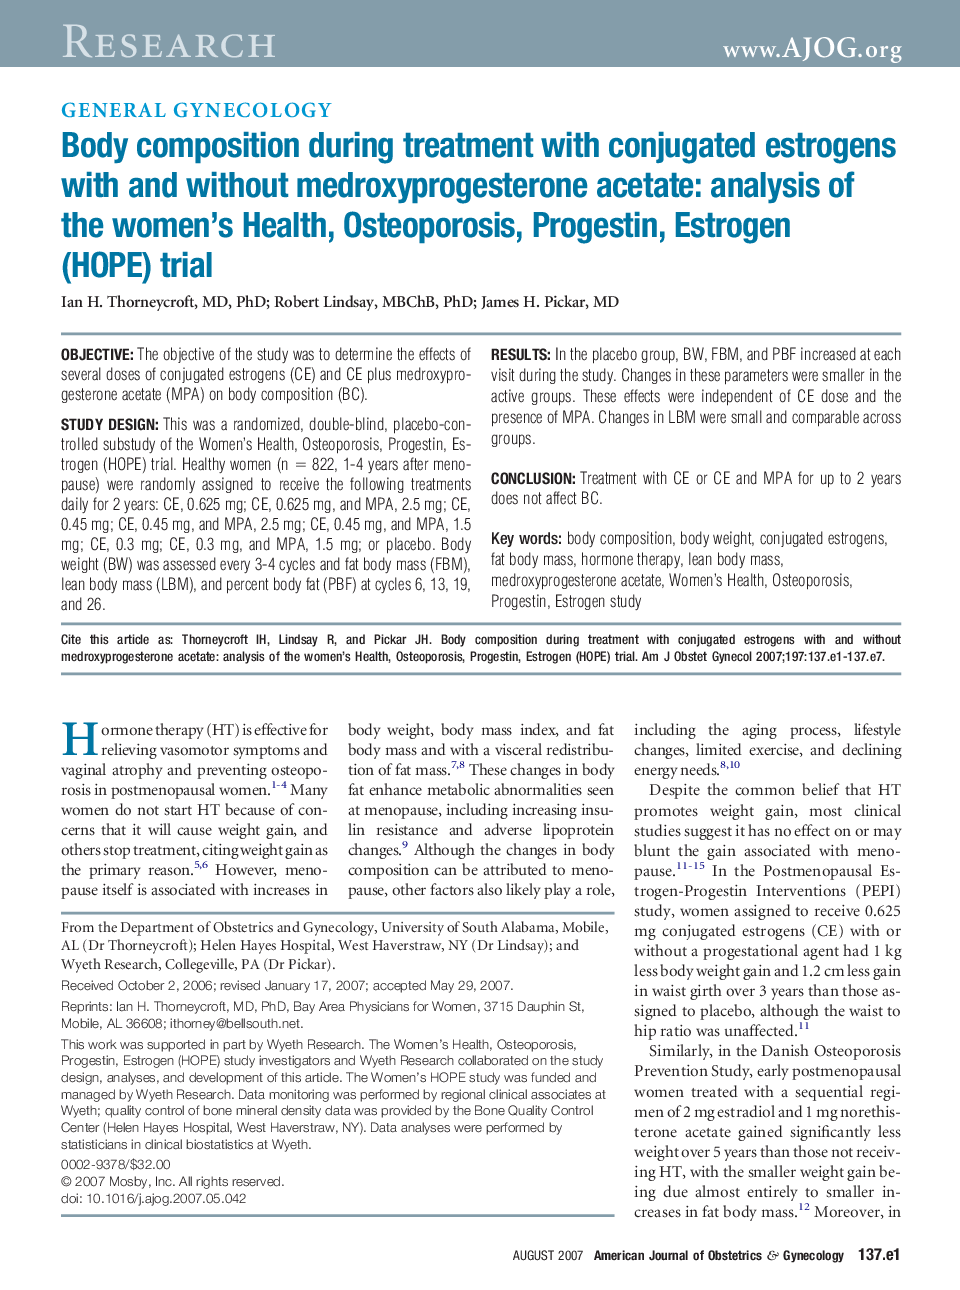 Body composition during treatment with conjugated estrogens with and without medroxyprogesterone acetate: analysis of the women's Health, Osteoporosis, Progestin, Estrogen (HOPE) trial